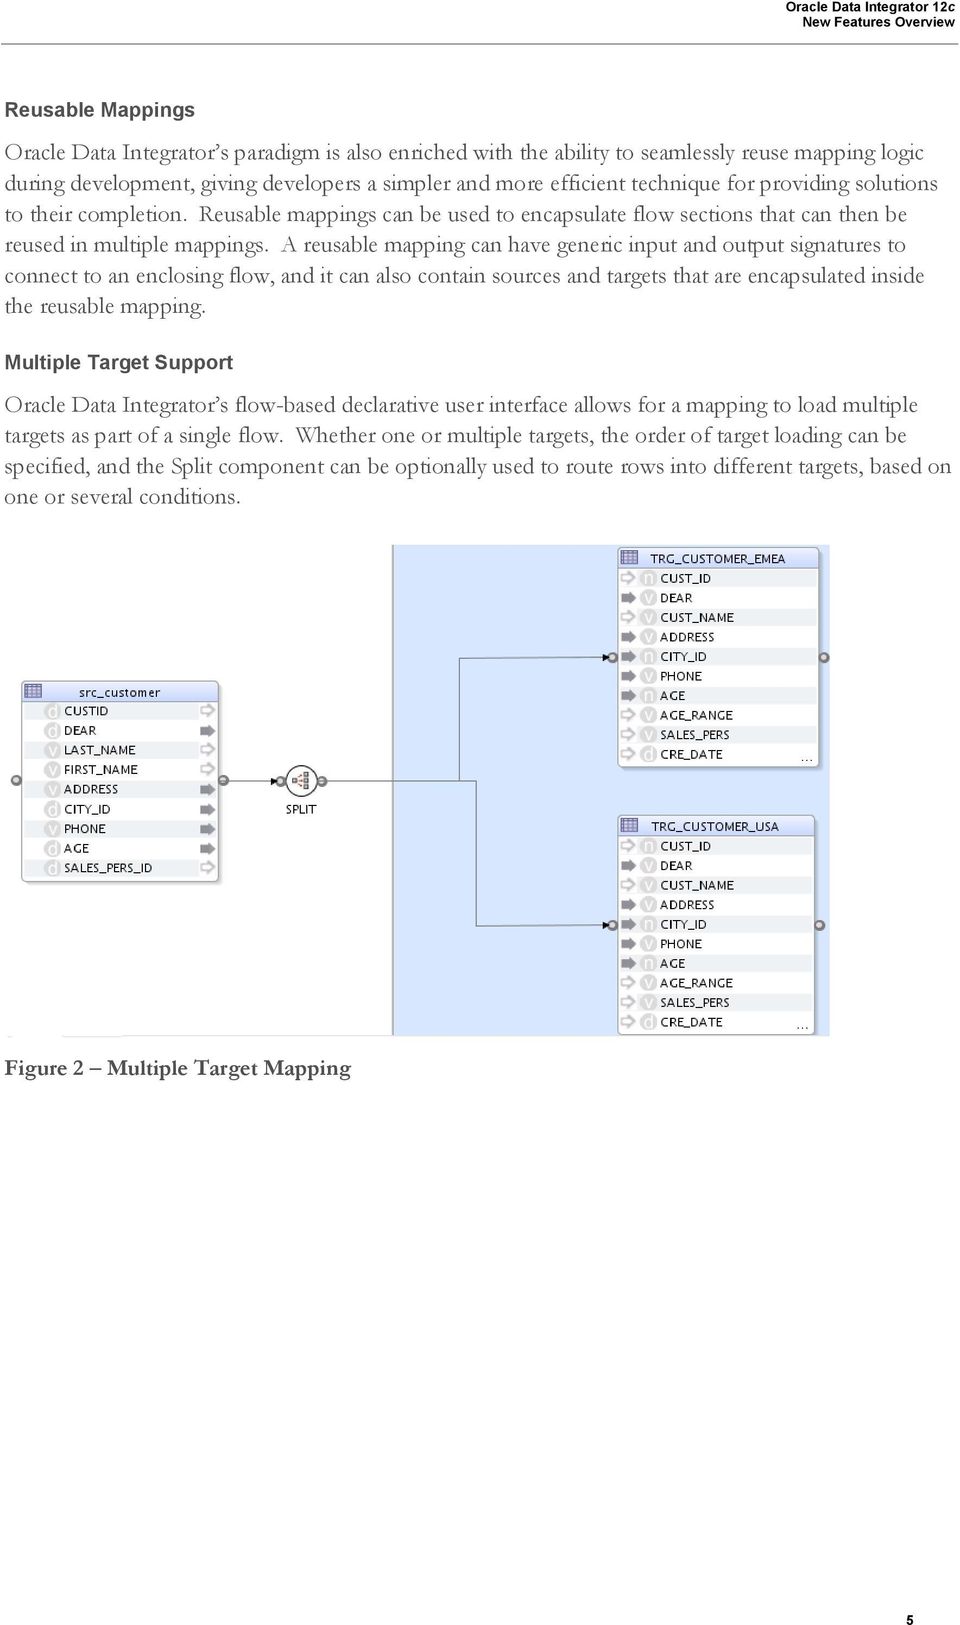 A reusable mapping can have generic input and output signatures to connect to an enclosing flow, and it can also contain sources and targets that are encapsulated inside the reusable mapping.